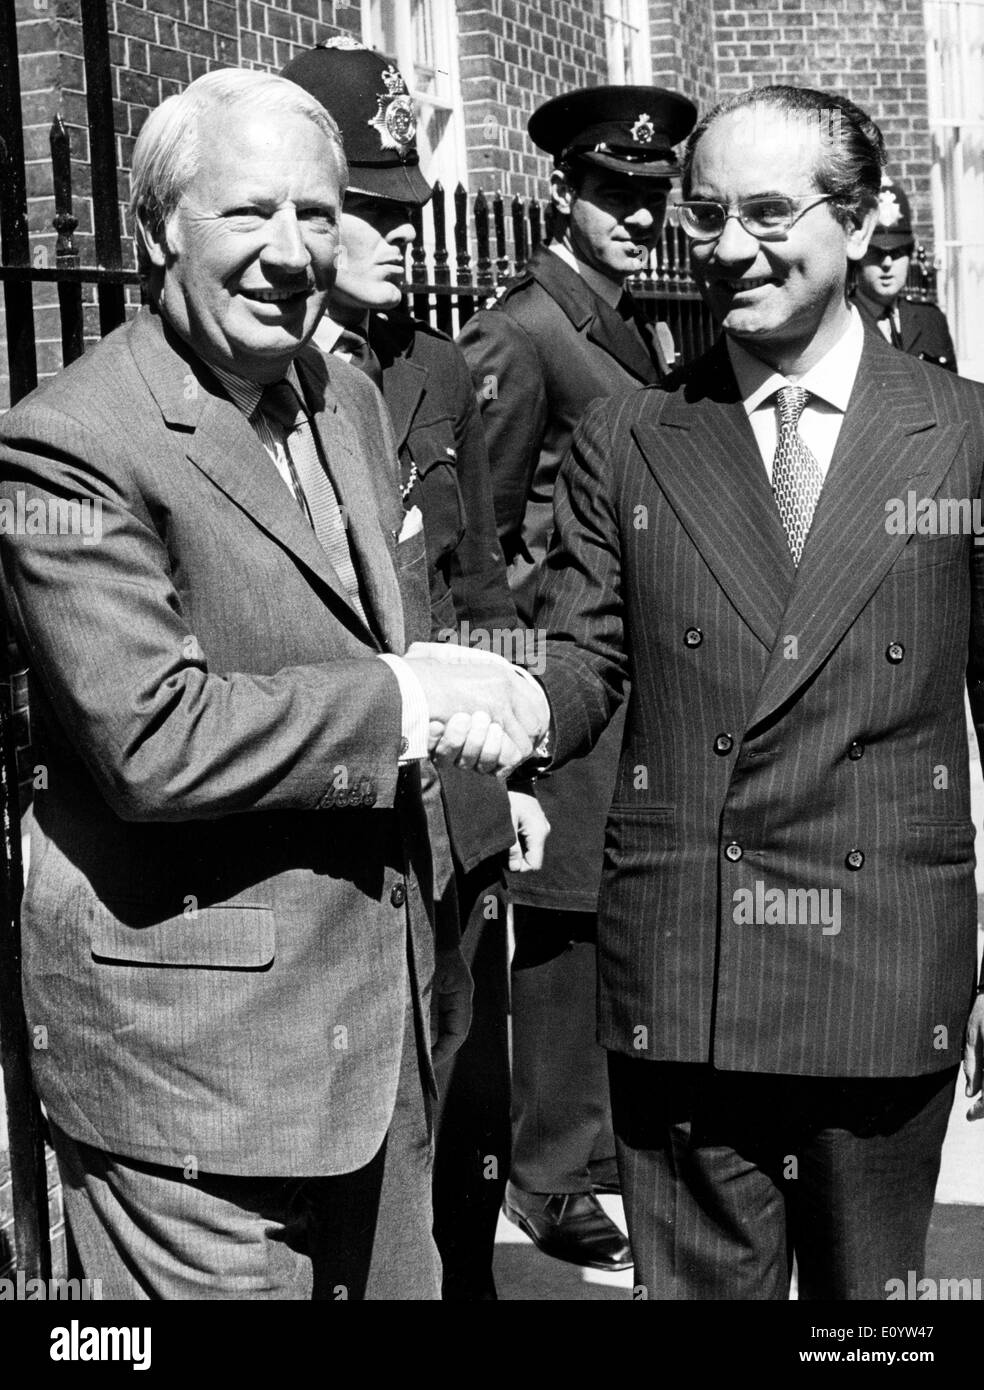 June 28, 1971 - London, England, United Kingdom - Britain's Prime Minister, EDWARD HEATH, is seen greeting, Italy's Prime Minister, EMILIO COLOMBO, after he arrives at number 10, Downing Street for talks. Stock Photo